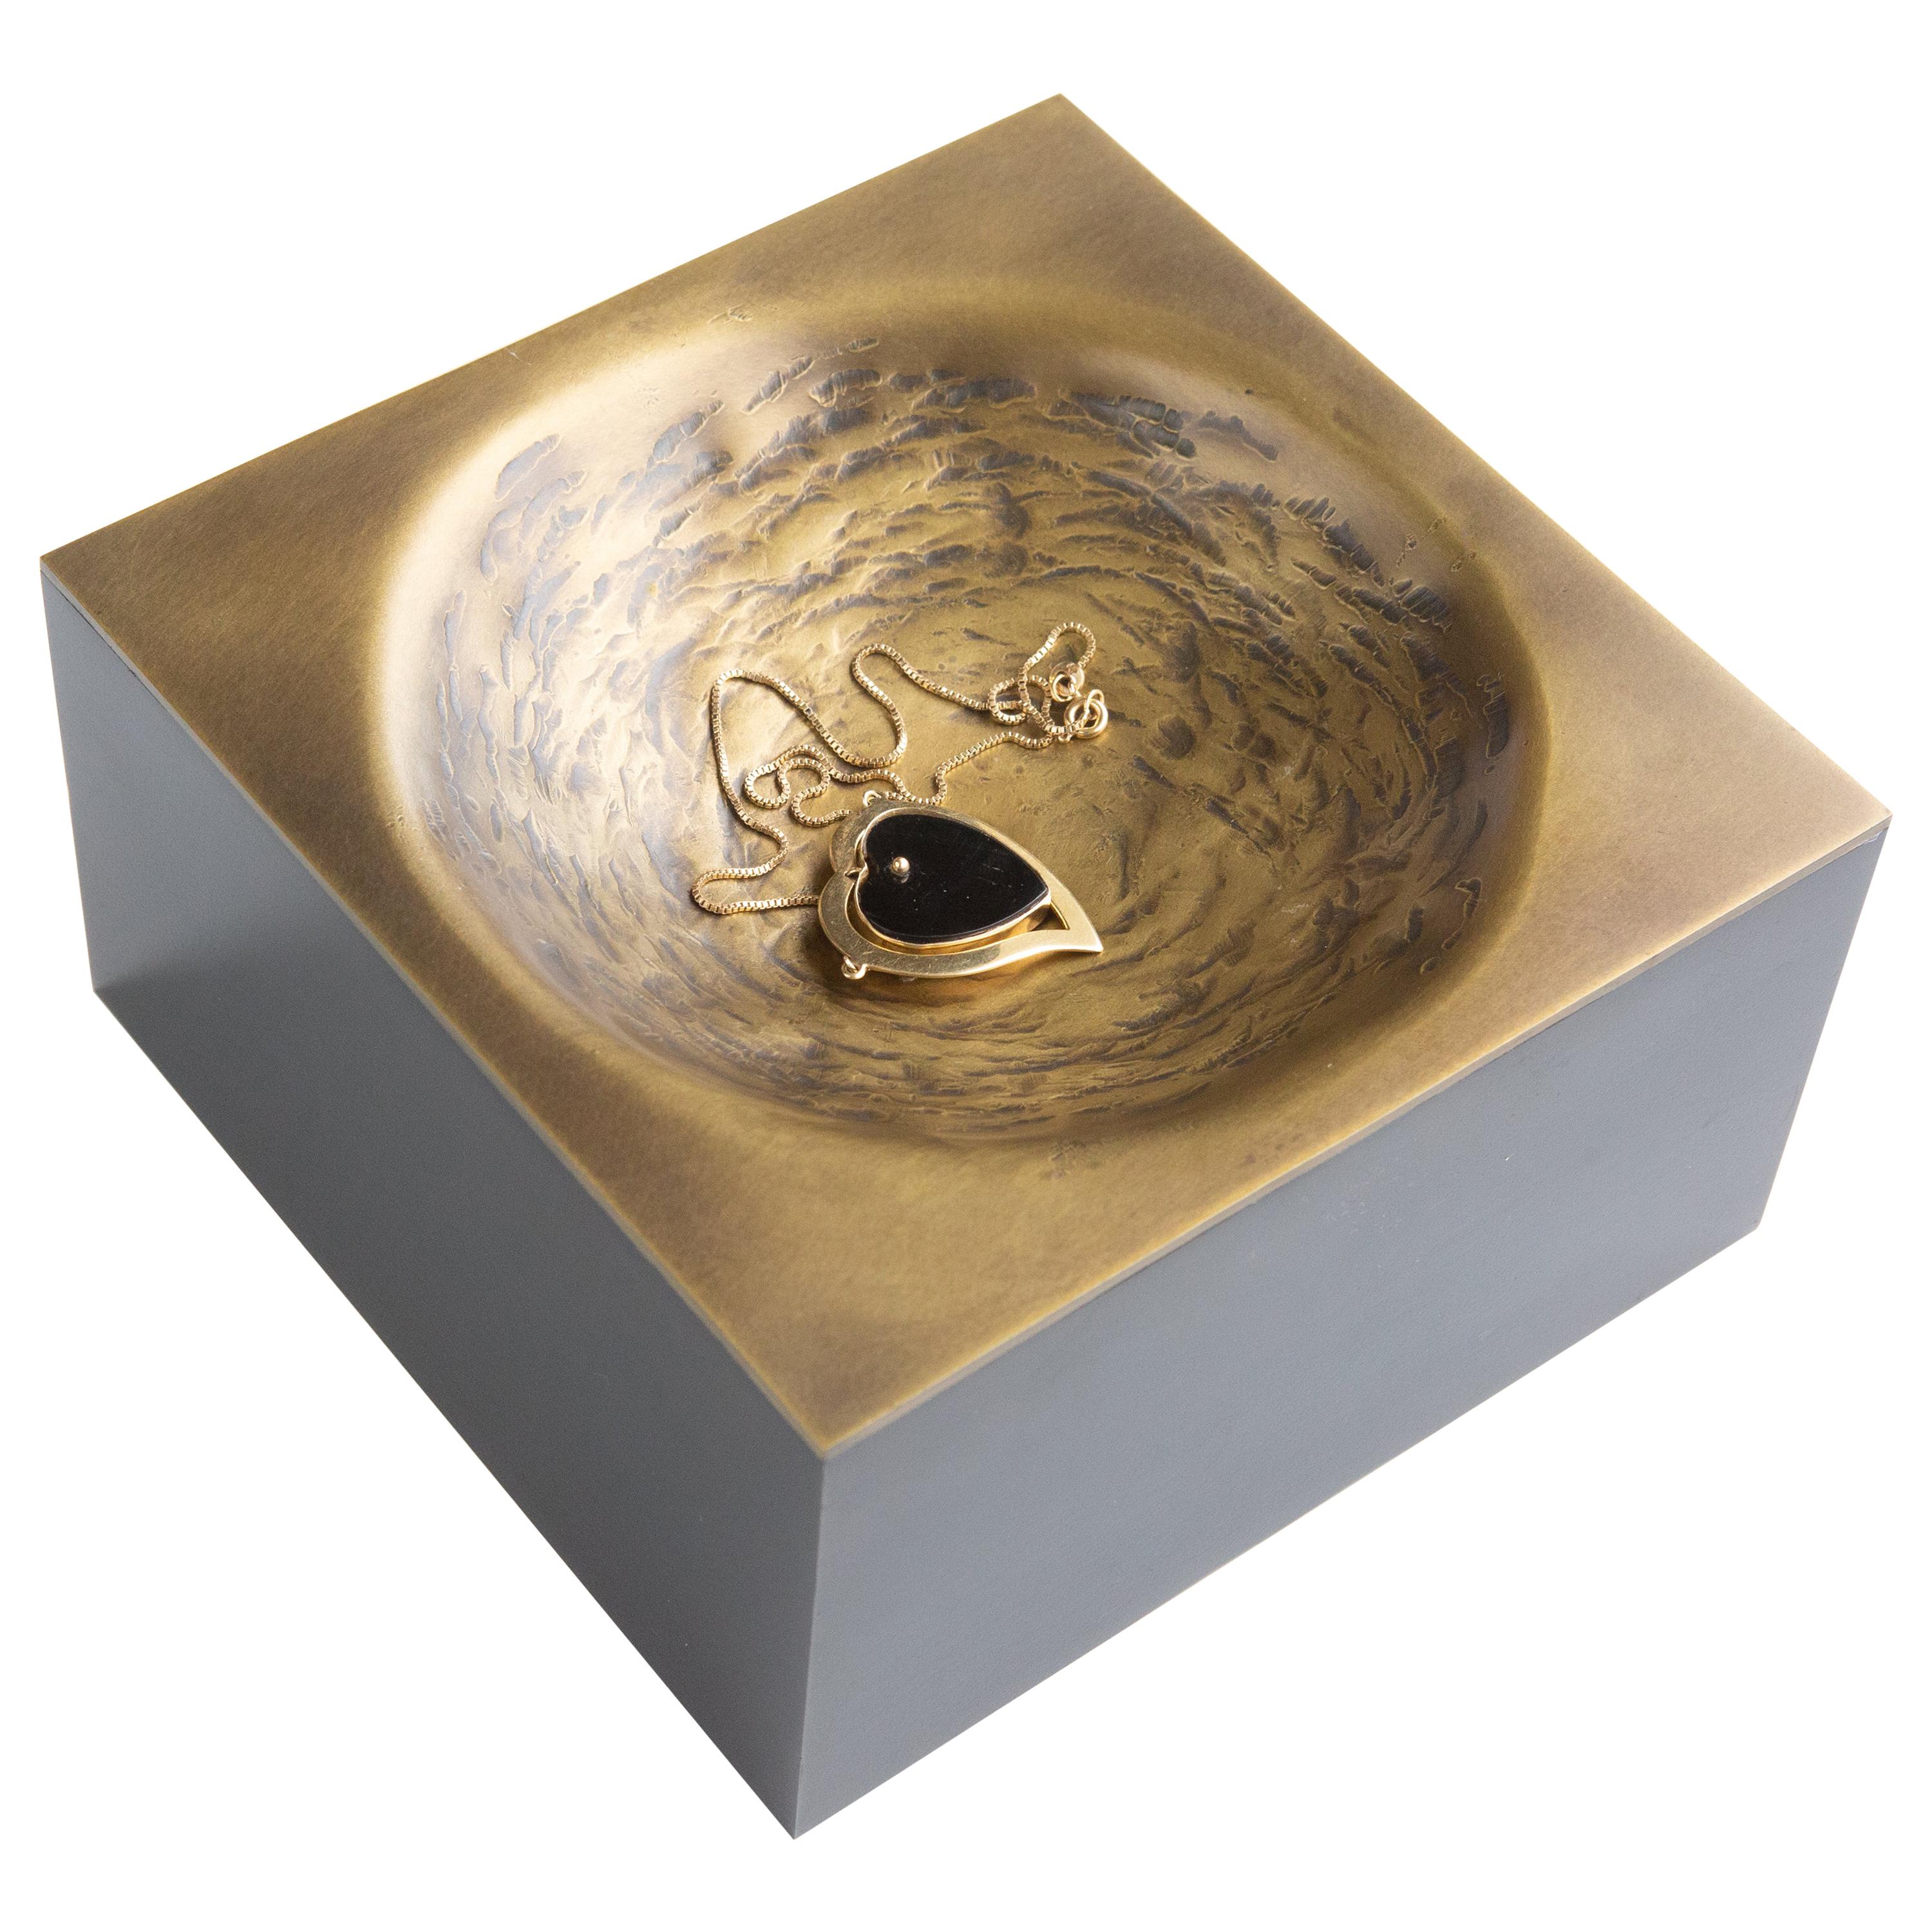 LIA 6" Square Handcrafted Brass and Steel Valet Bowl Tray by Soraya Osorio